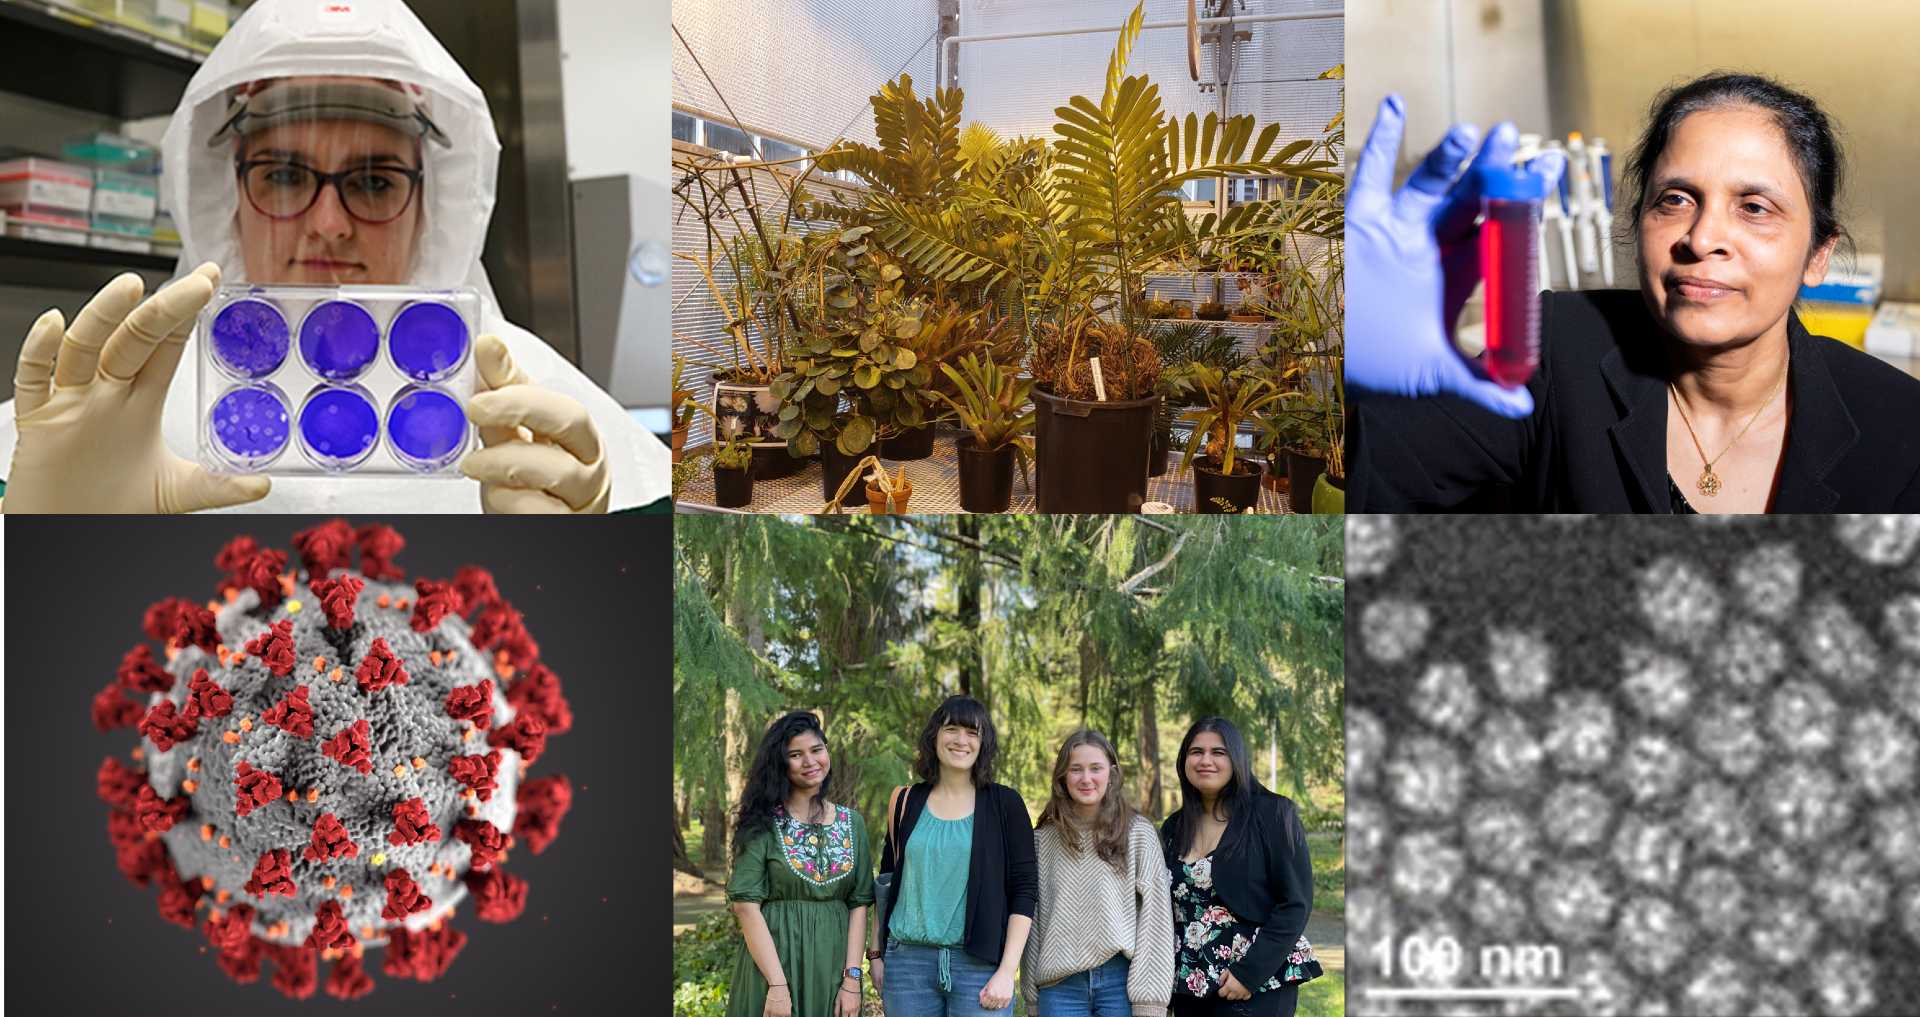 Collage of images, including Mariya Goncheva in a PPE suit, plants in the greenhouse, Chithrani holding up a vial of red liquid, the COVID-19 virus, the Templeman lab, and an image of PIHC micelle from and electron microscope